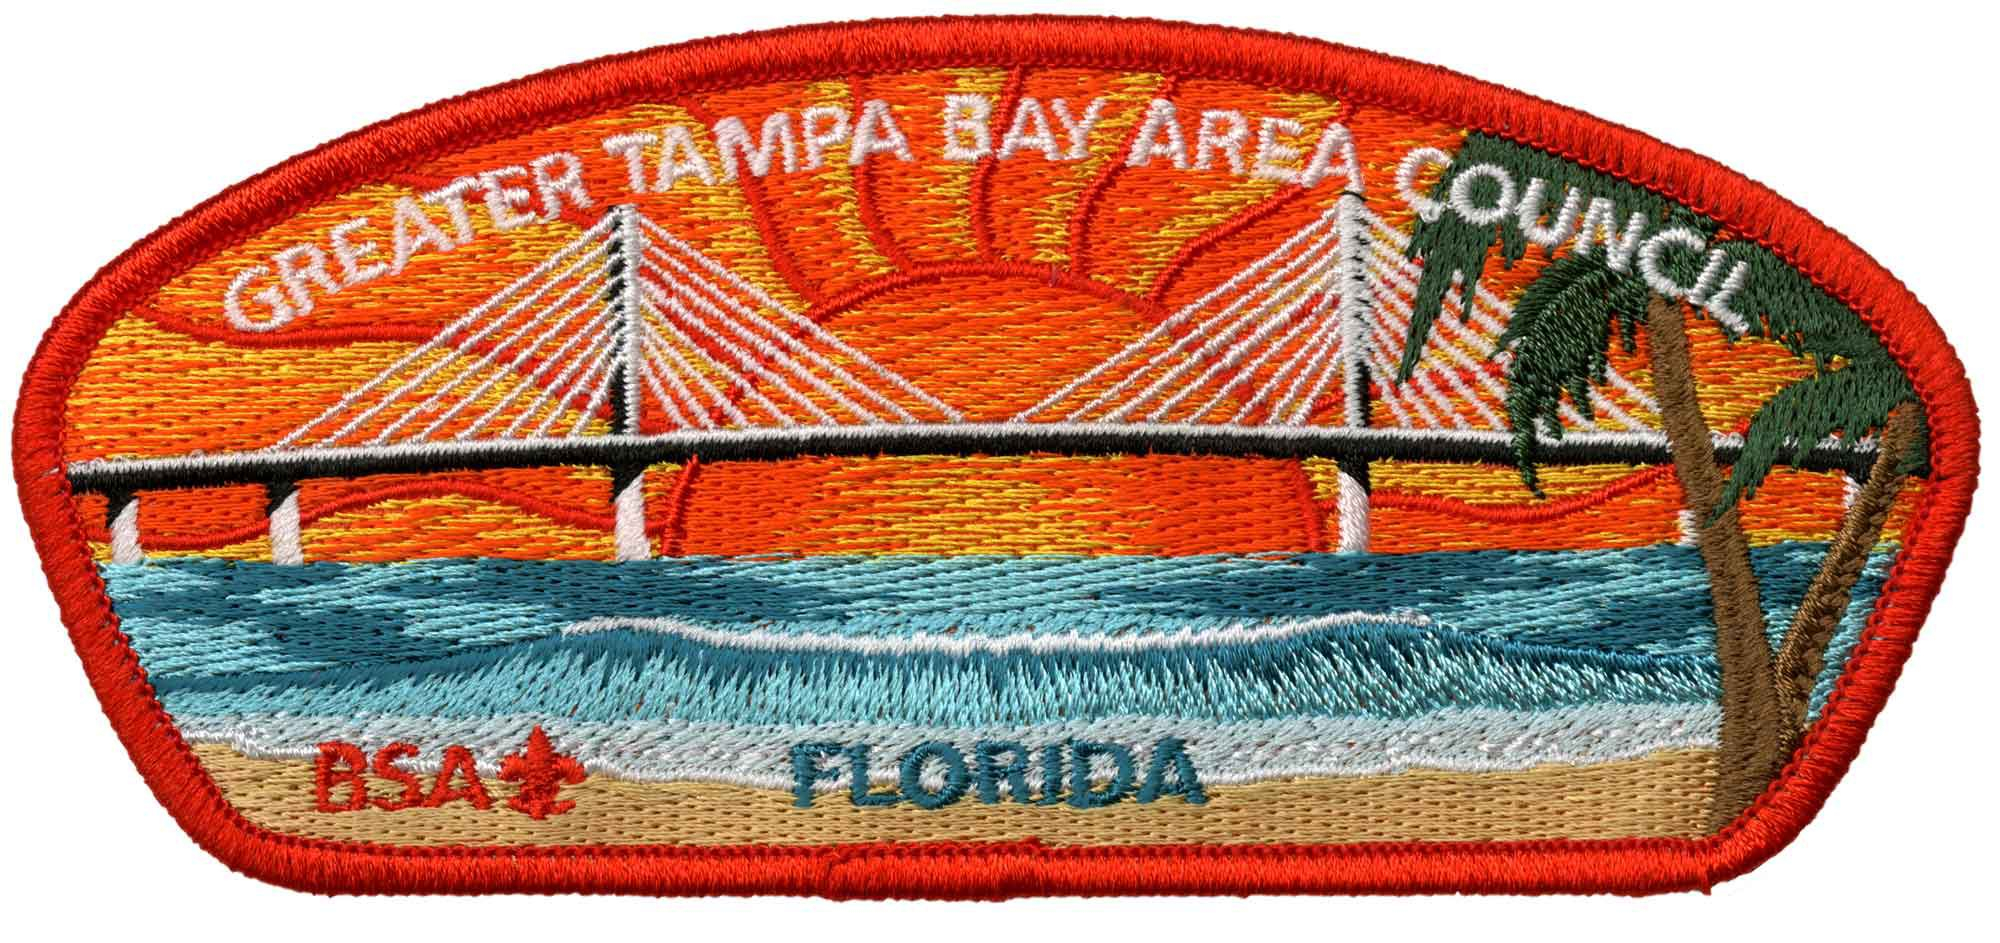 Q SCOUT BSA LAKE REGION LARGE PATCH CANOE FLORIDA GREATER TAMPA BAY AREA CNCL